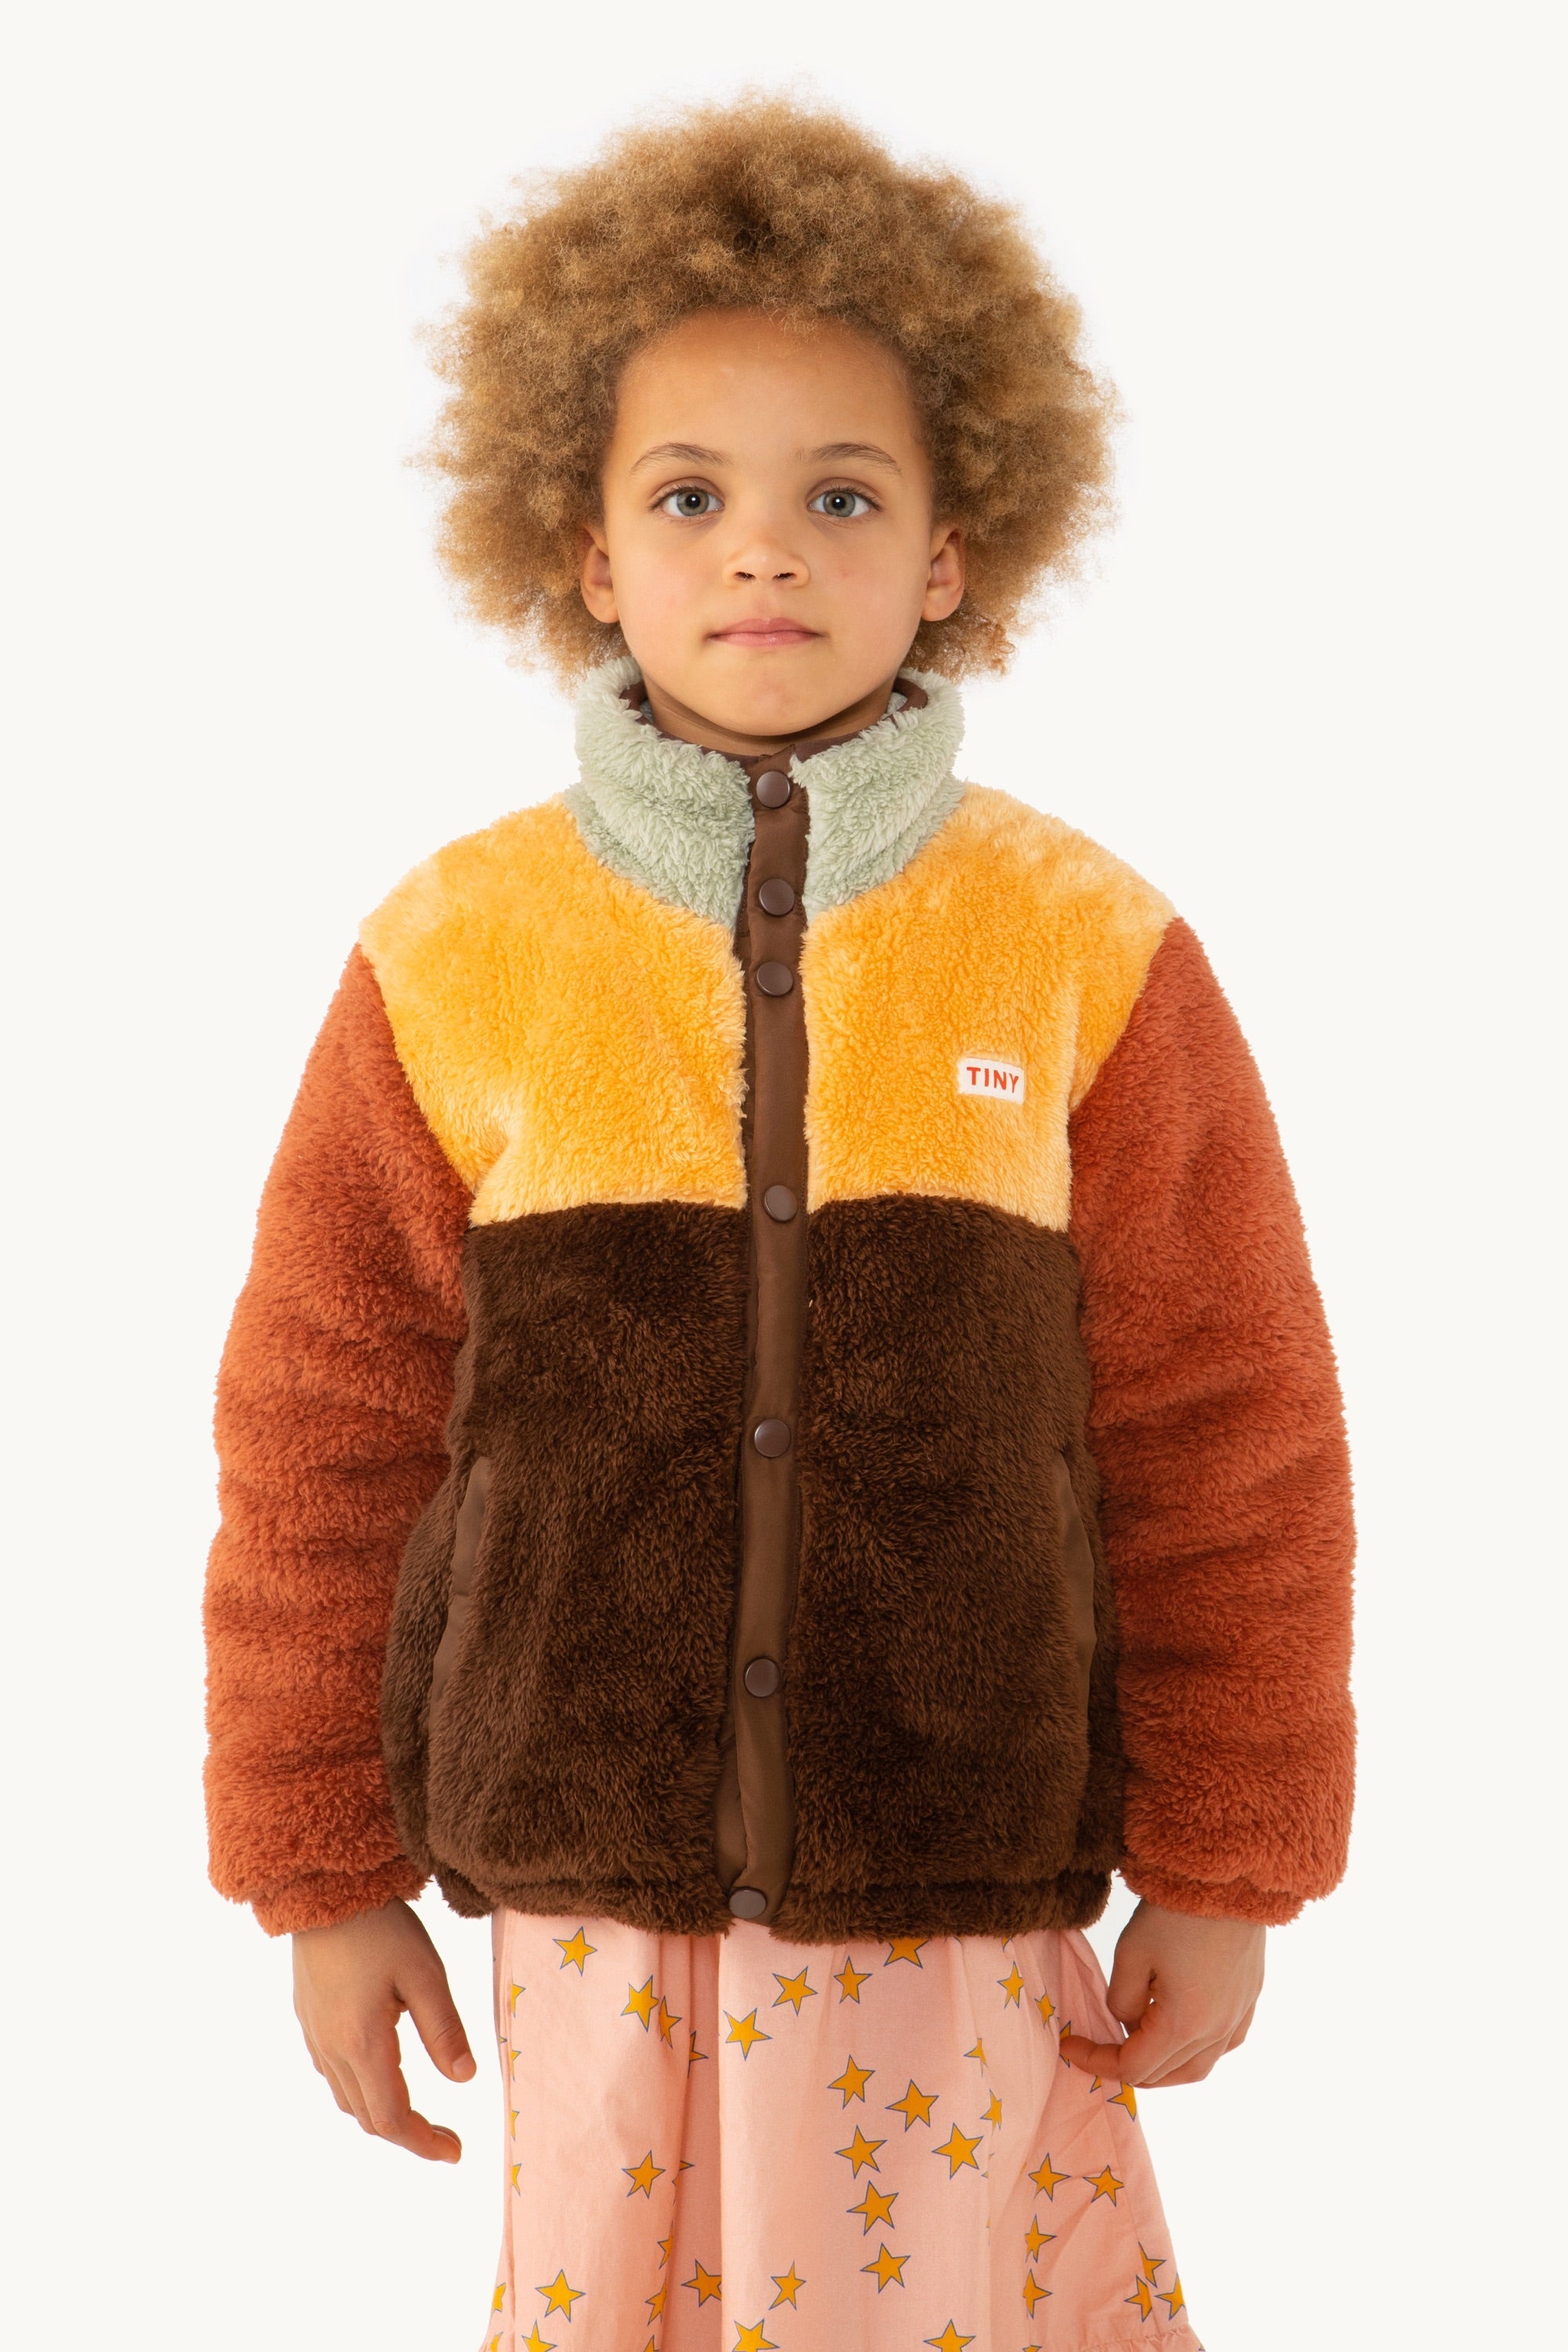 TinyCottonsタイニーコットンズ | Color Block Polar Sherpa Jacket dark brown/soft  yellow